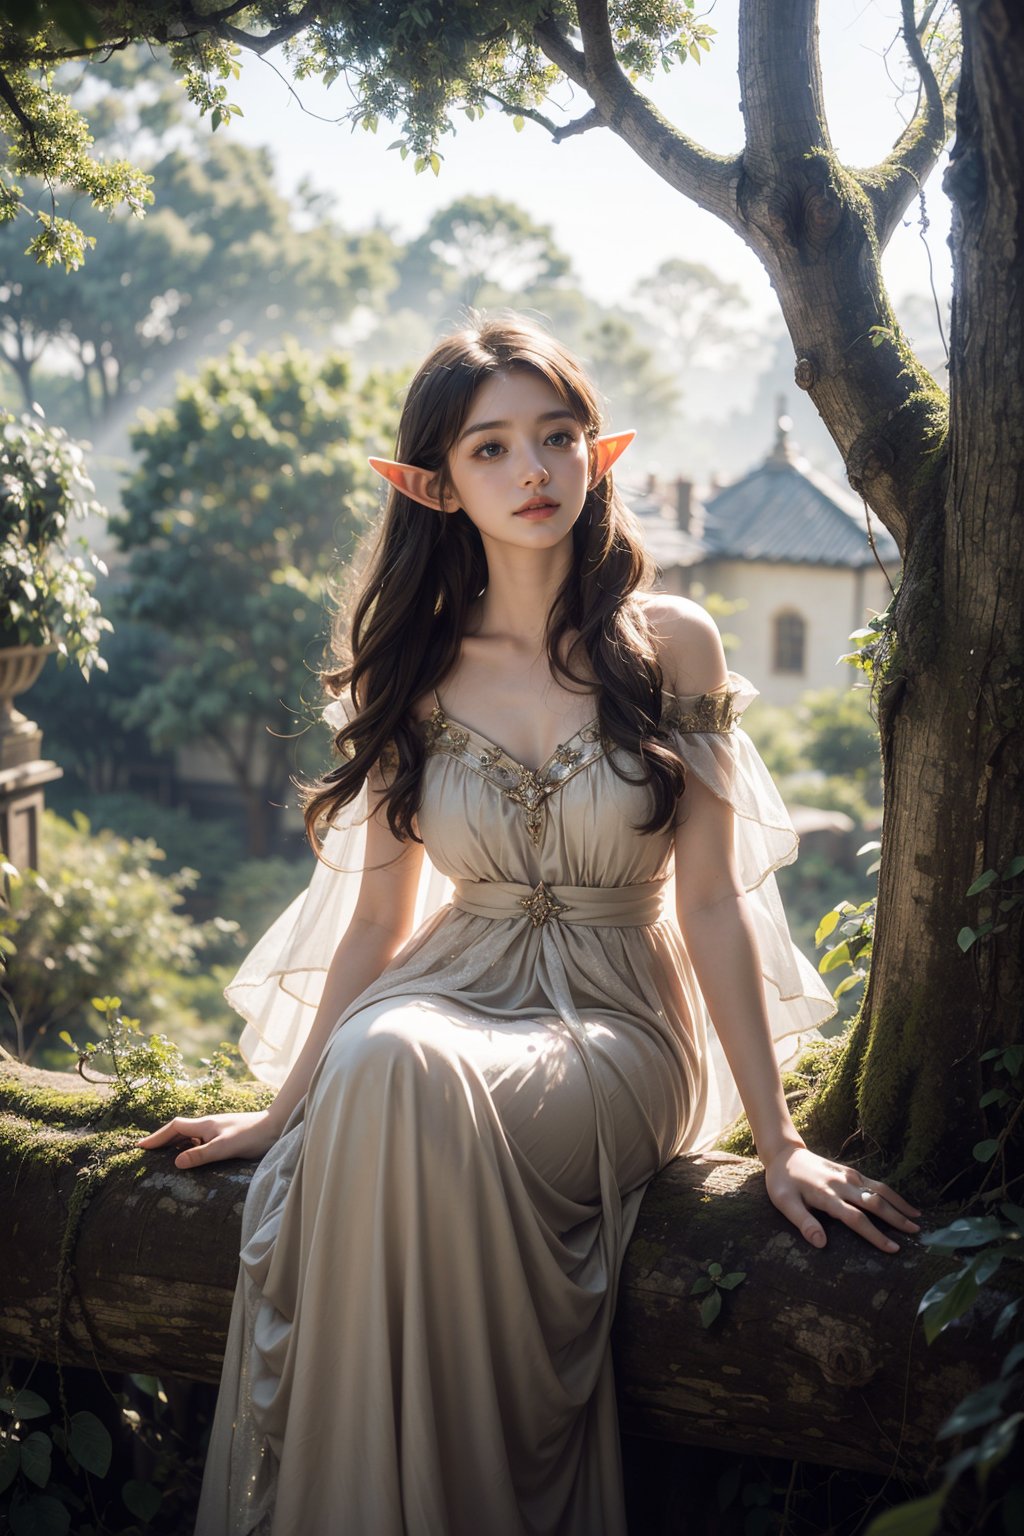 era elf,(giant elves sit on the treetops:1.2),enchanting beauty,(fantasy),(elf mother tree),(world tree),ethereal glow,pointed ears,delicate facial features,long elegant hair,mystical ambiance,soft lighting,tranquil expression,harmonious with nature,subtle magical elements,serene,dreamlike quality,pastel colors,(castle)